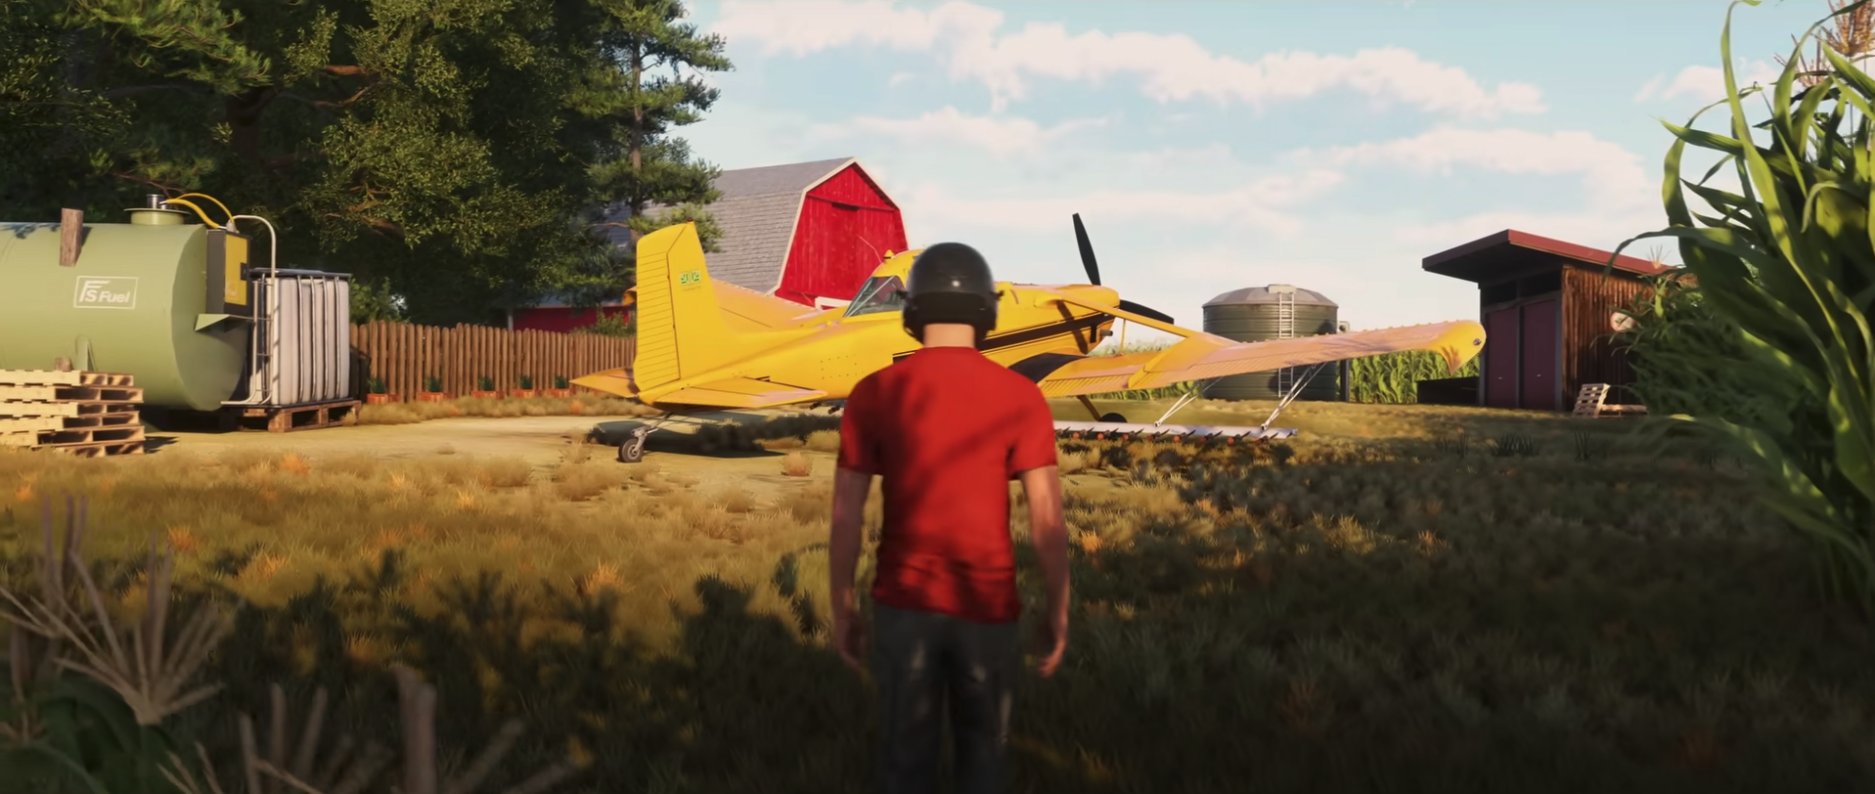 Hands-on: Microsoft Flight Simulator 2020 Global Preview Event •